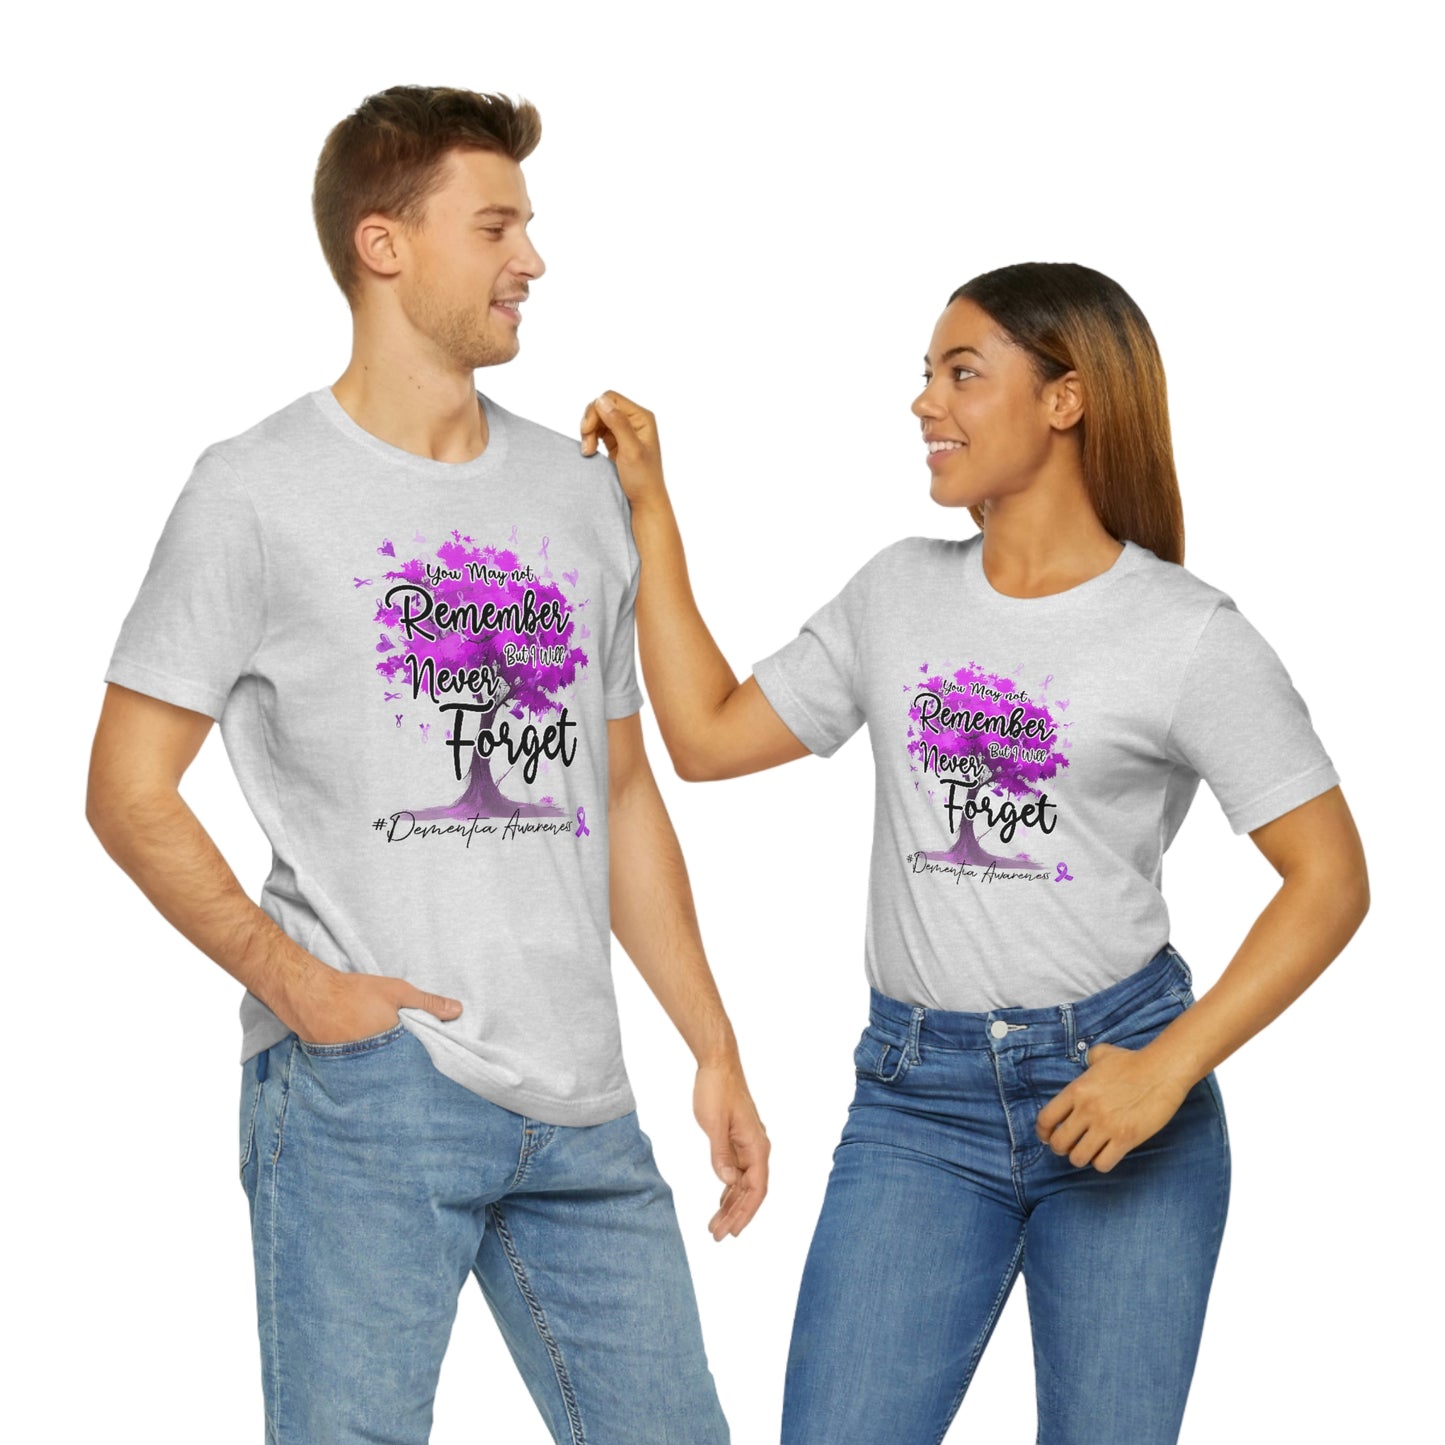 You May Not Remember But I Will Never Forget Dementia Awareness Print Unisex Jersey Short Sleeve Tee